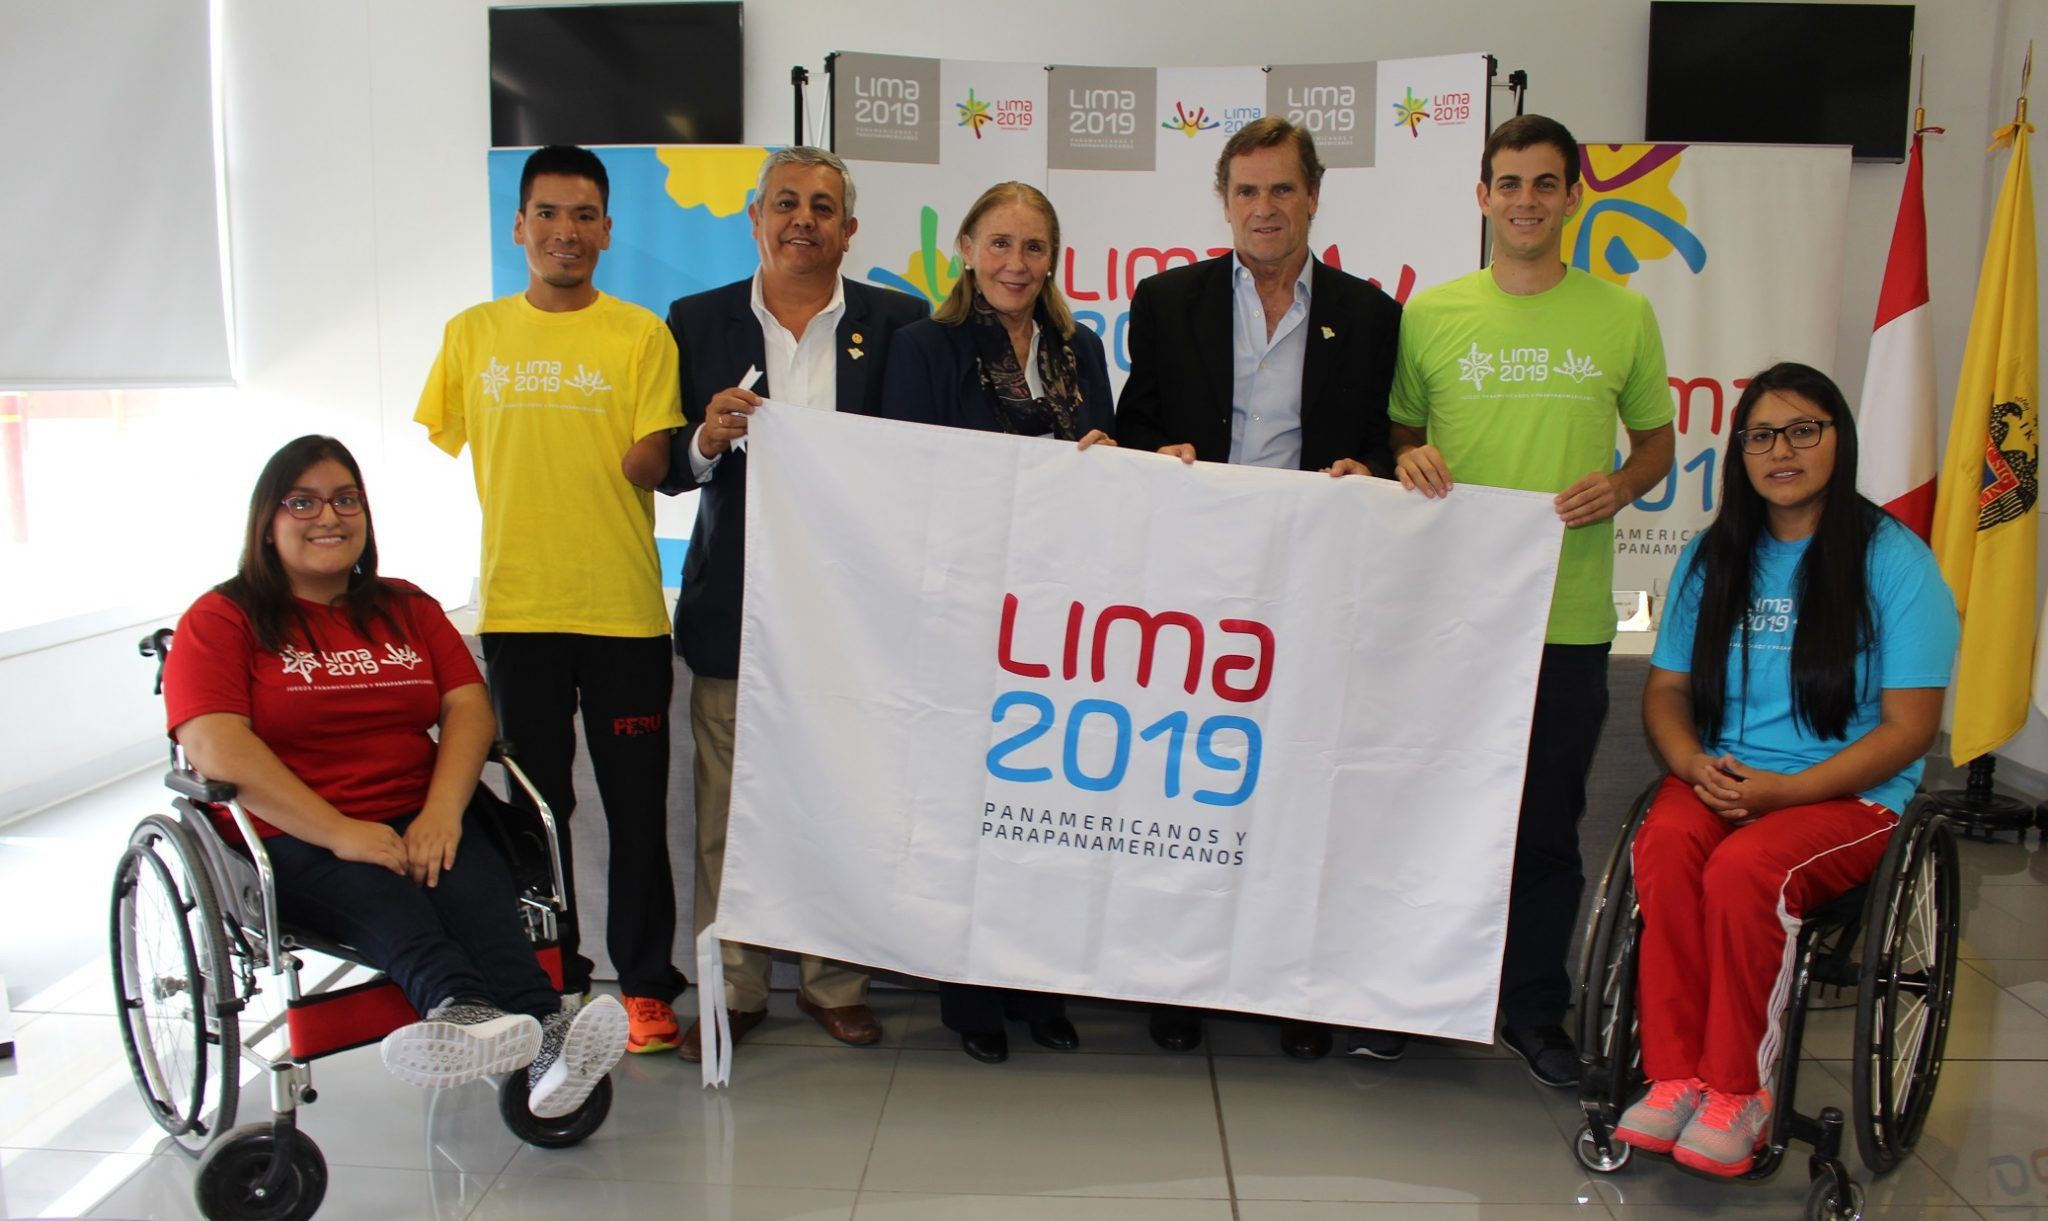 Organisers of the 2019 Parapan Am Games in Lima have organised a sports demonstration event at the National Stadium ©Lima 2019